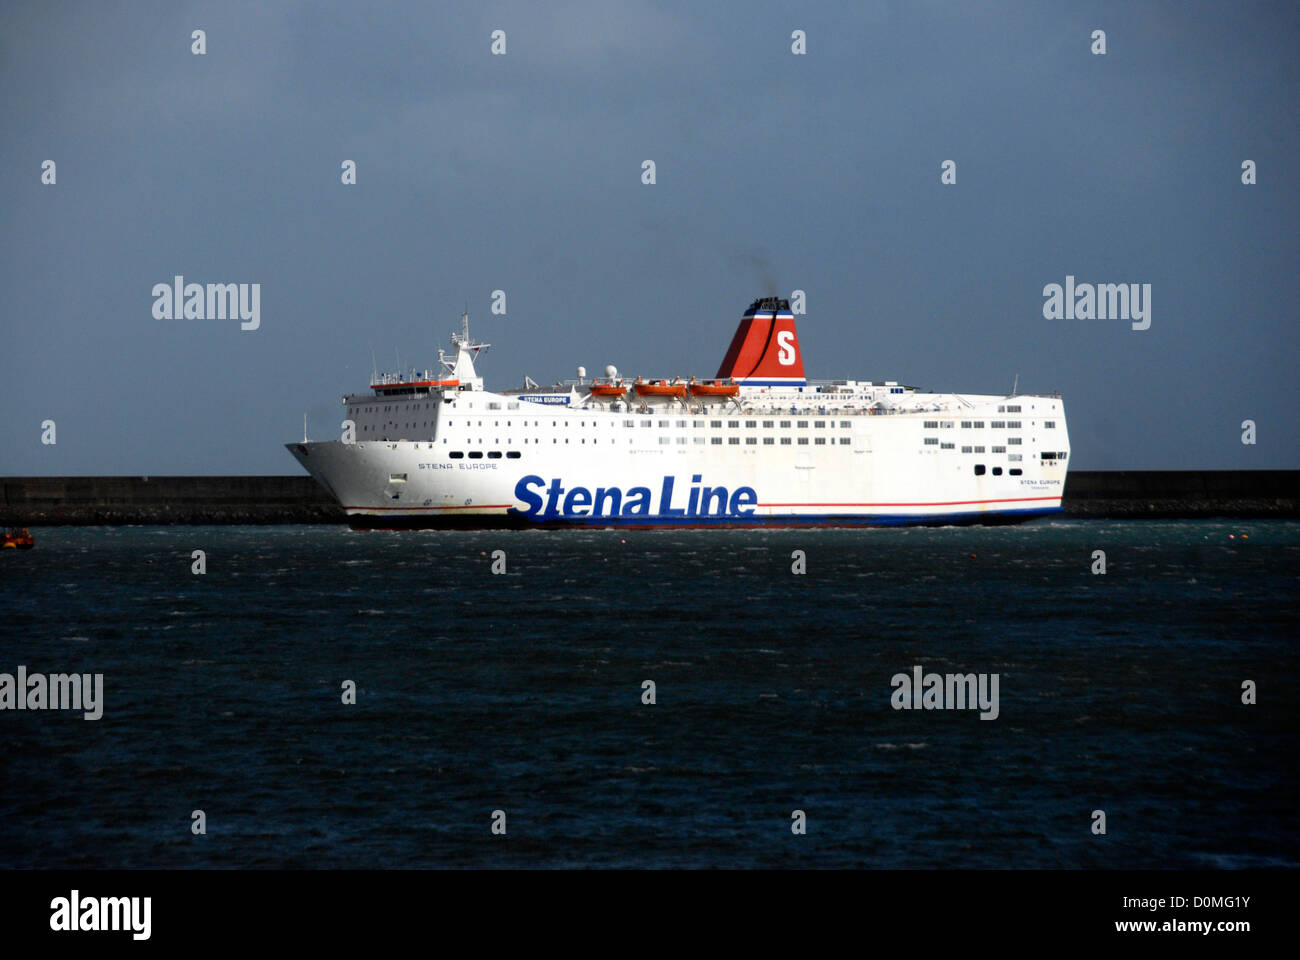 Stenaline Fishguard to Rosslare, Ireland ferry arriving Fishguard port, south Wales Stock Photo